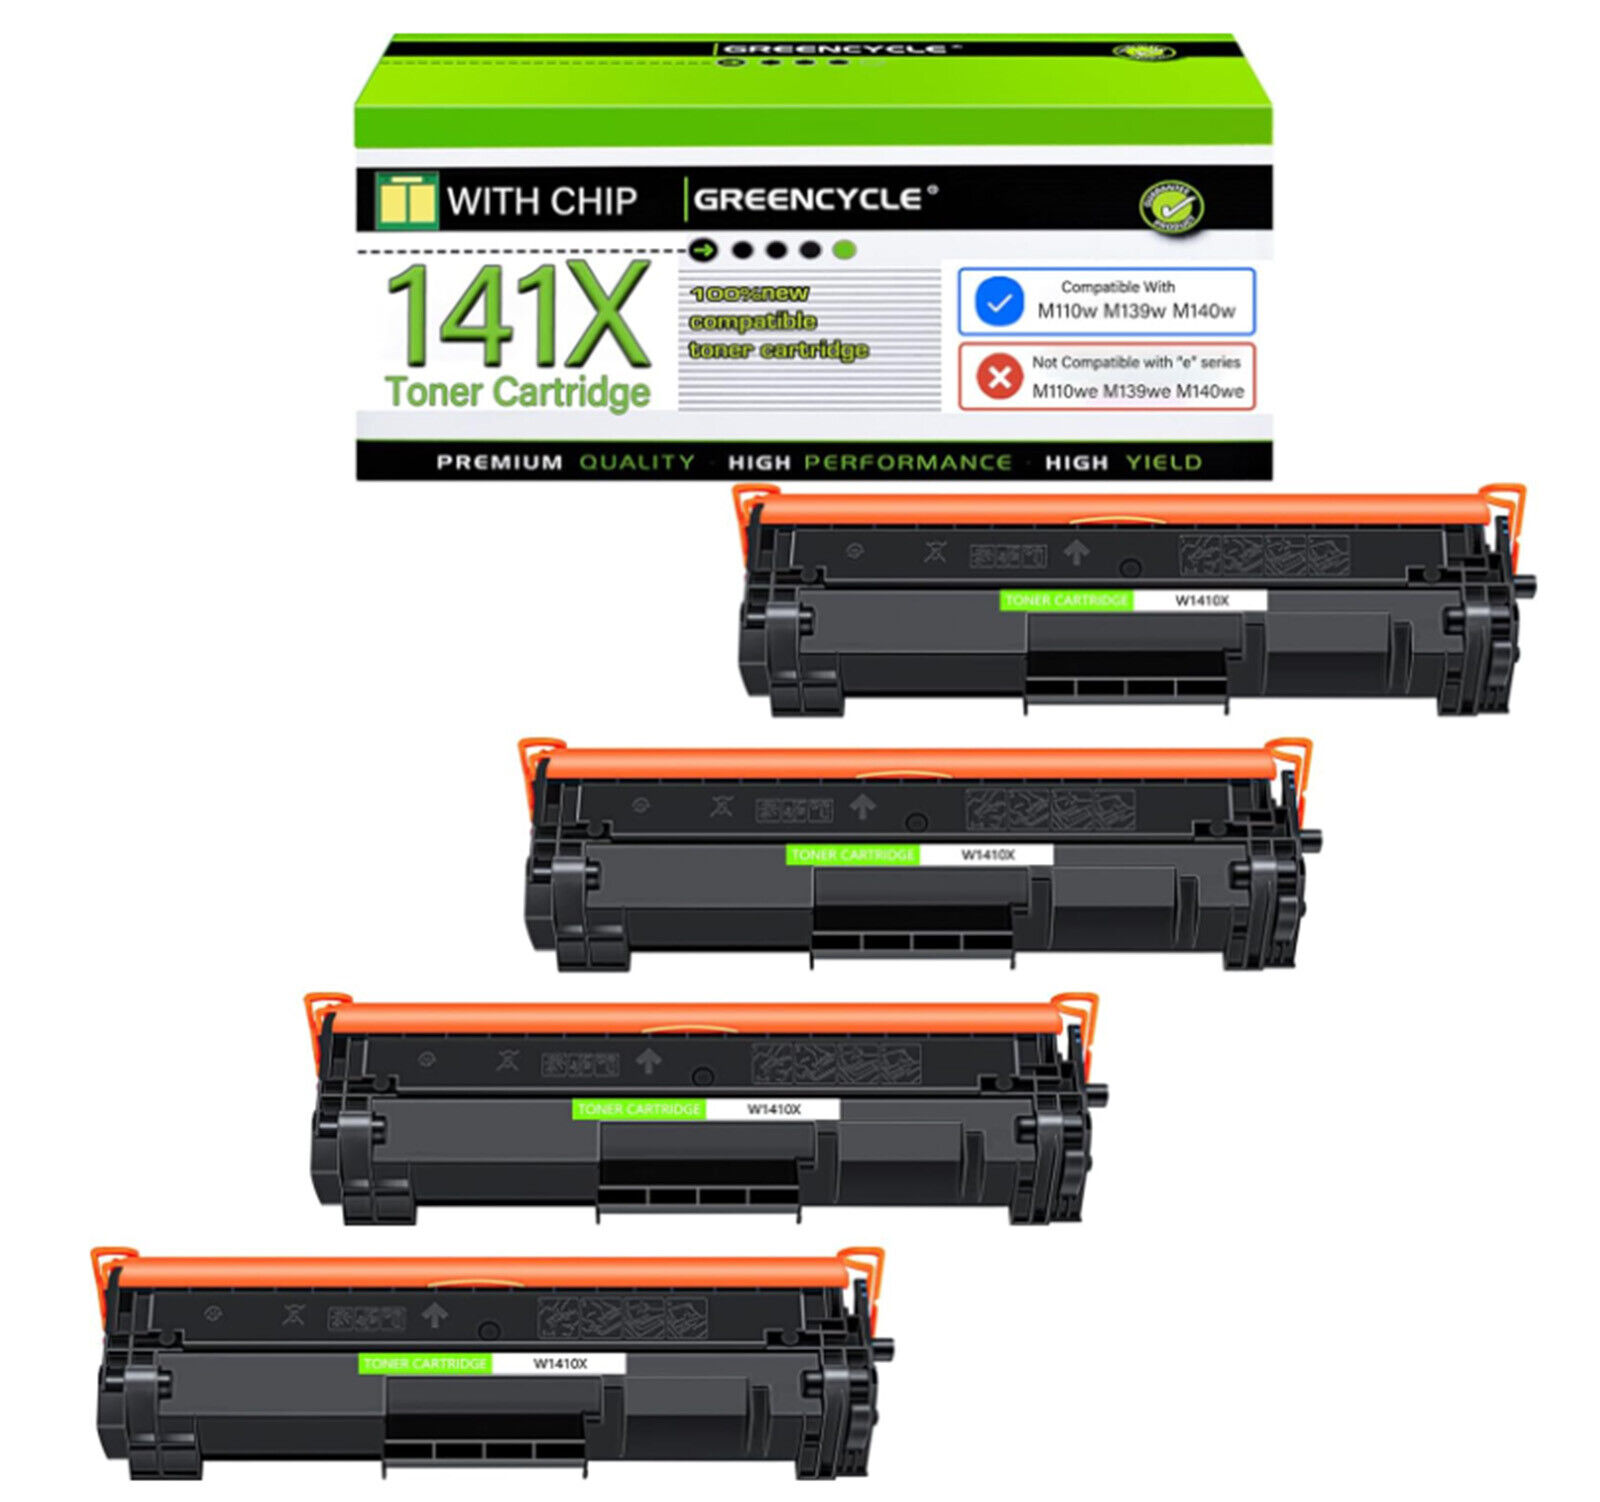 Black W1410X 141X Compatible HP Toner Cartridges GREENCYCLE High Yield with Chip